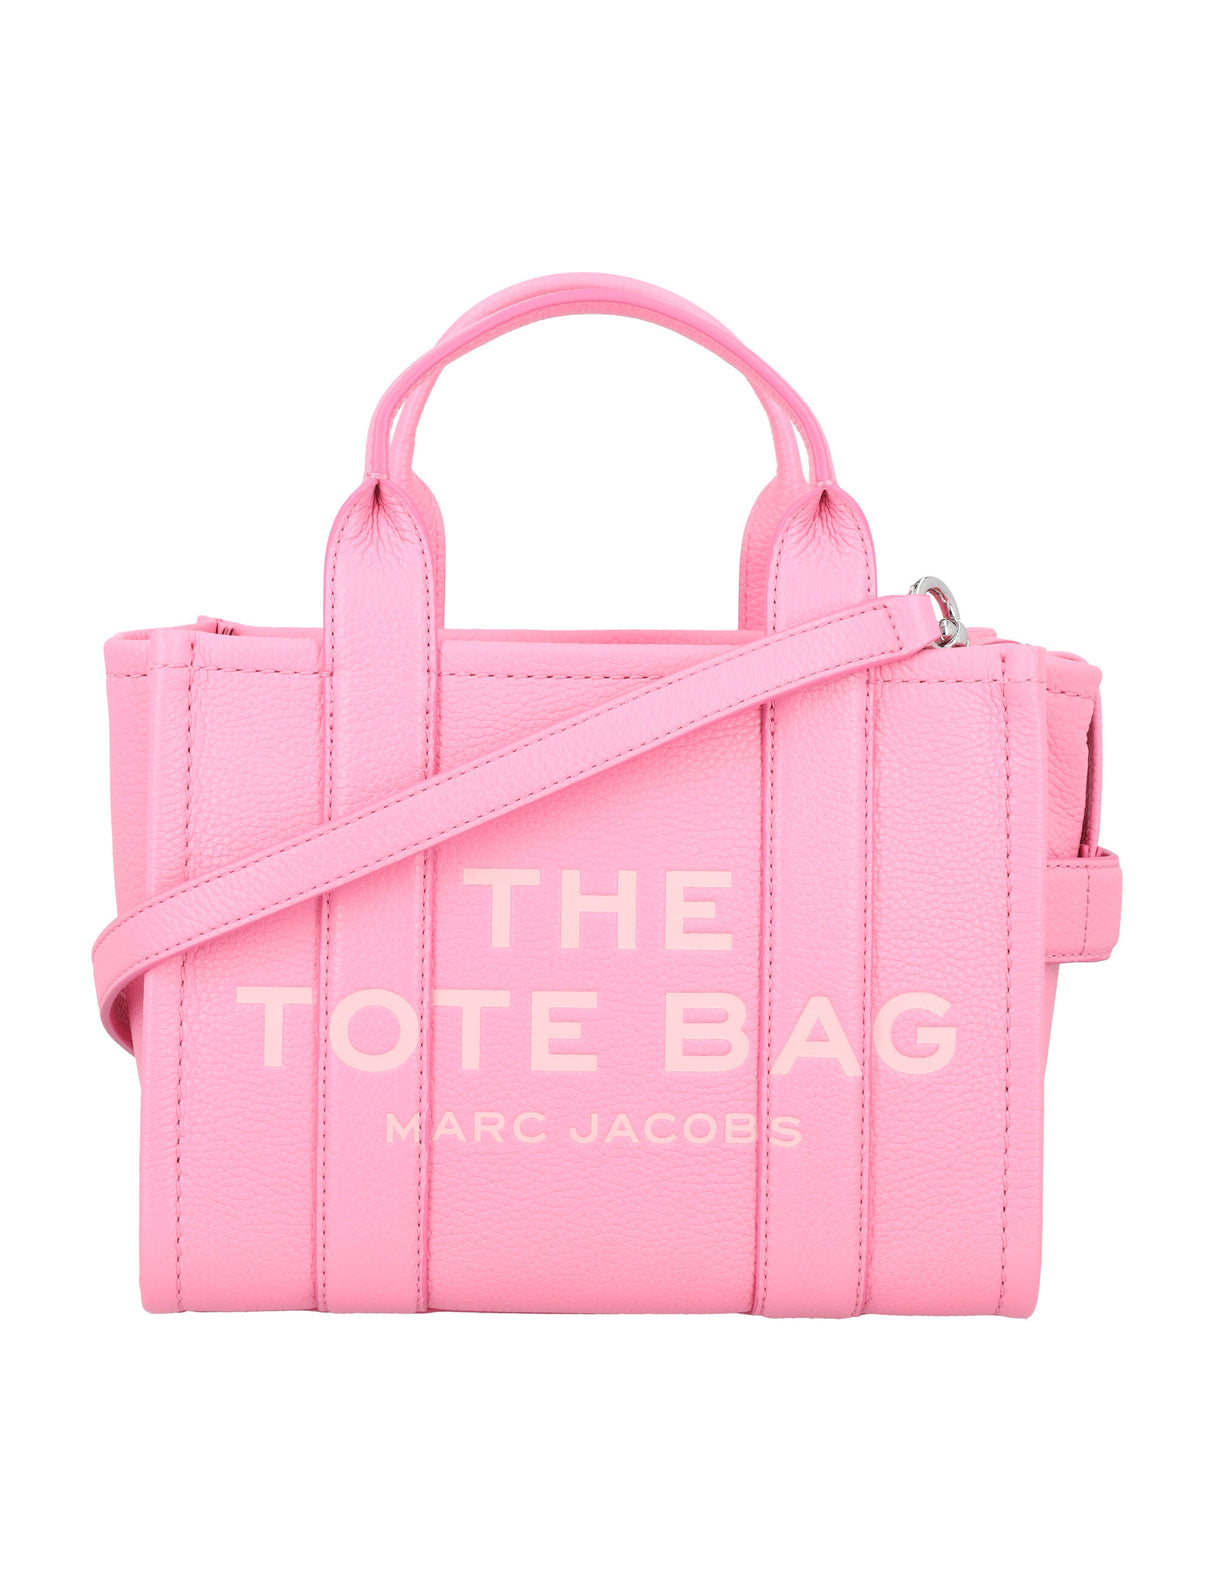 MARC JACOBS Petite Tote Handbag in Petal Pink Grained Leather with Silver-Tone Accents - Mini Size 25x20.5x12 cm